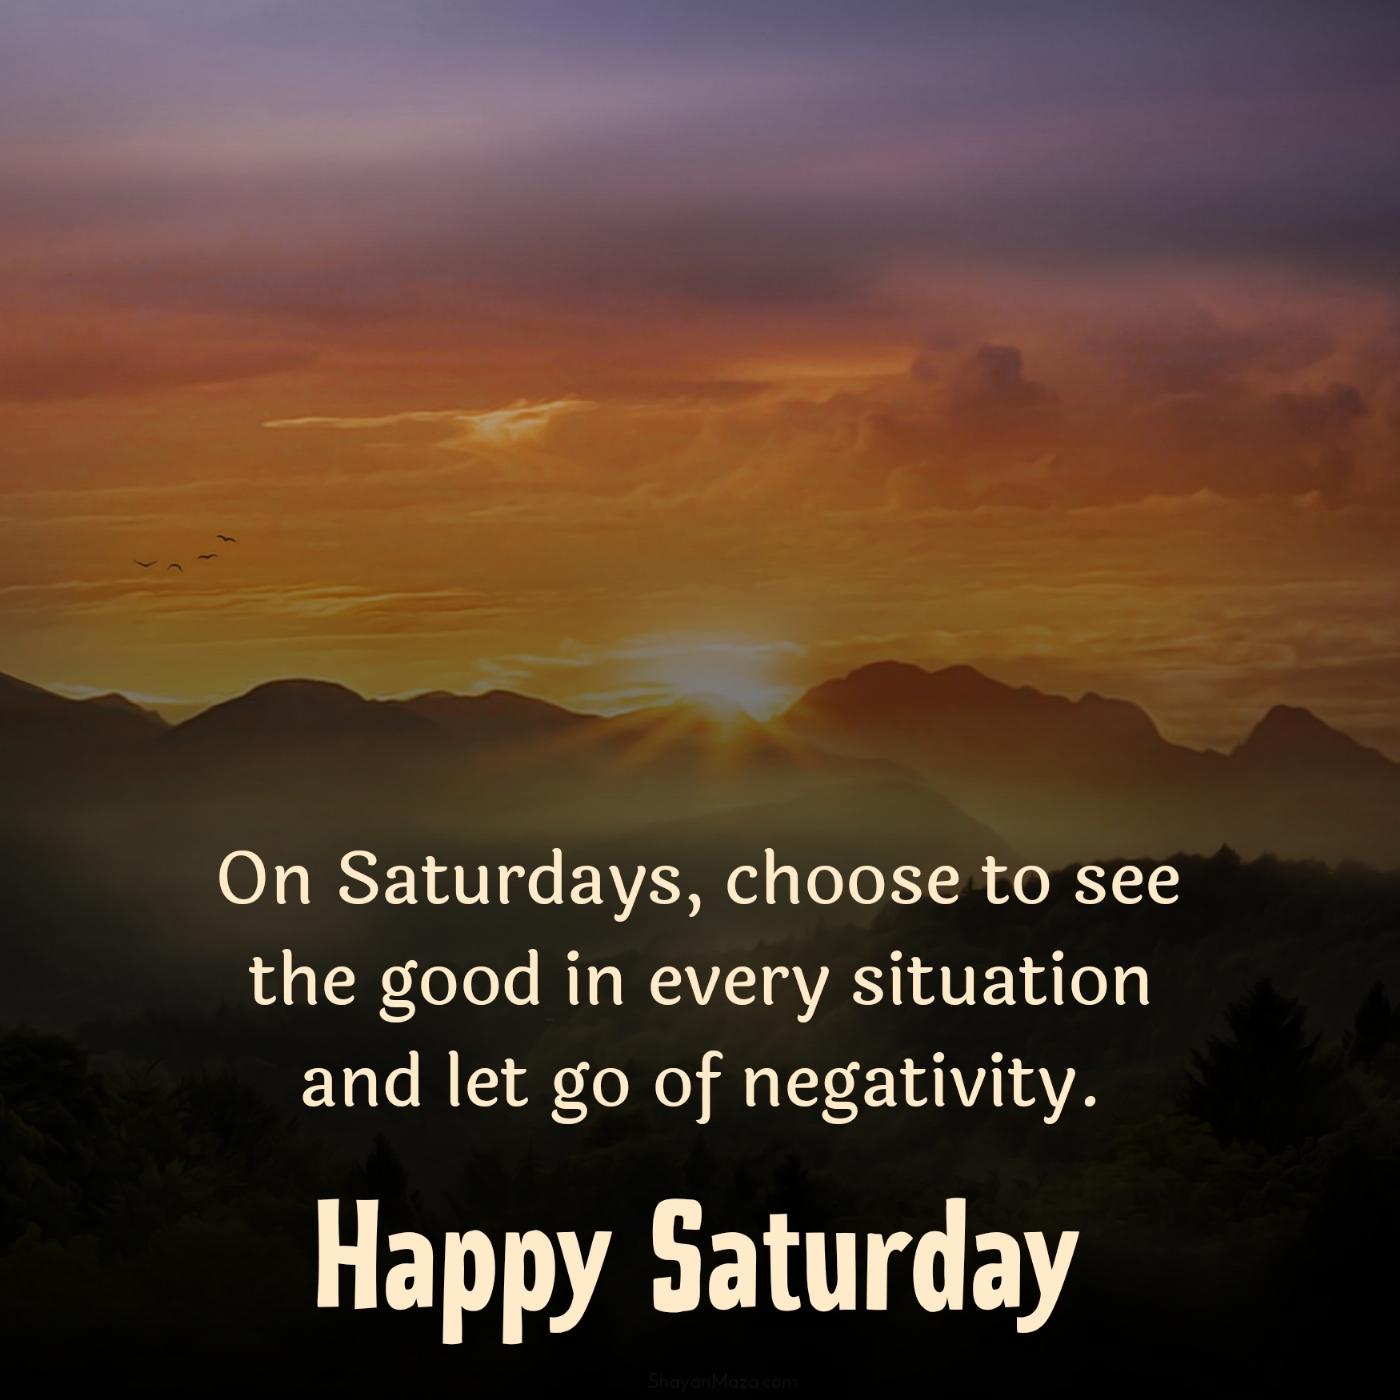 On Saturdays choose to see the good in every situation